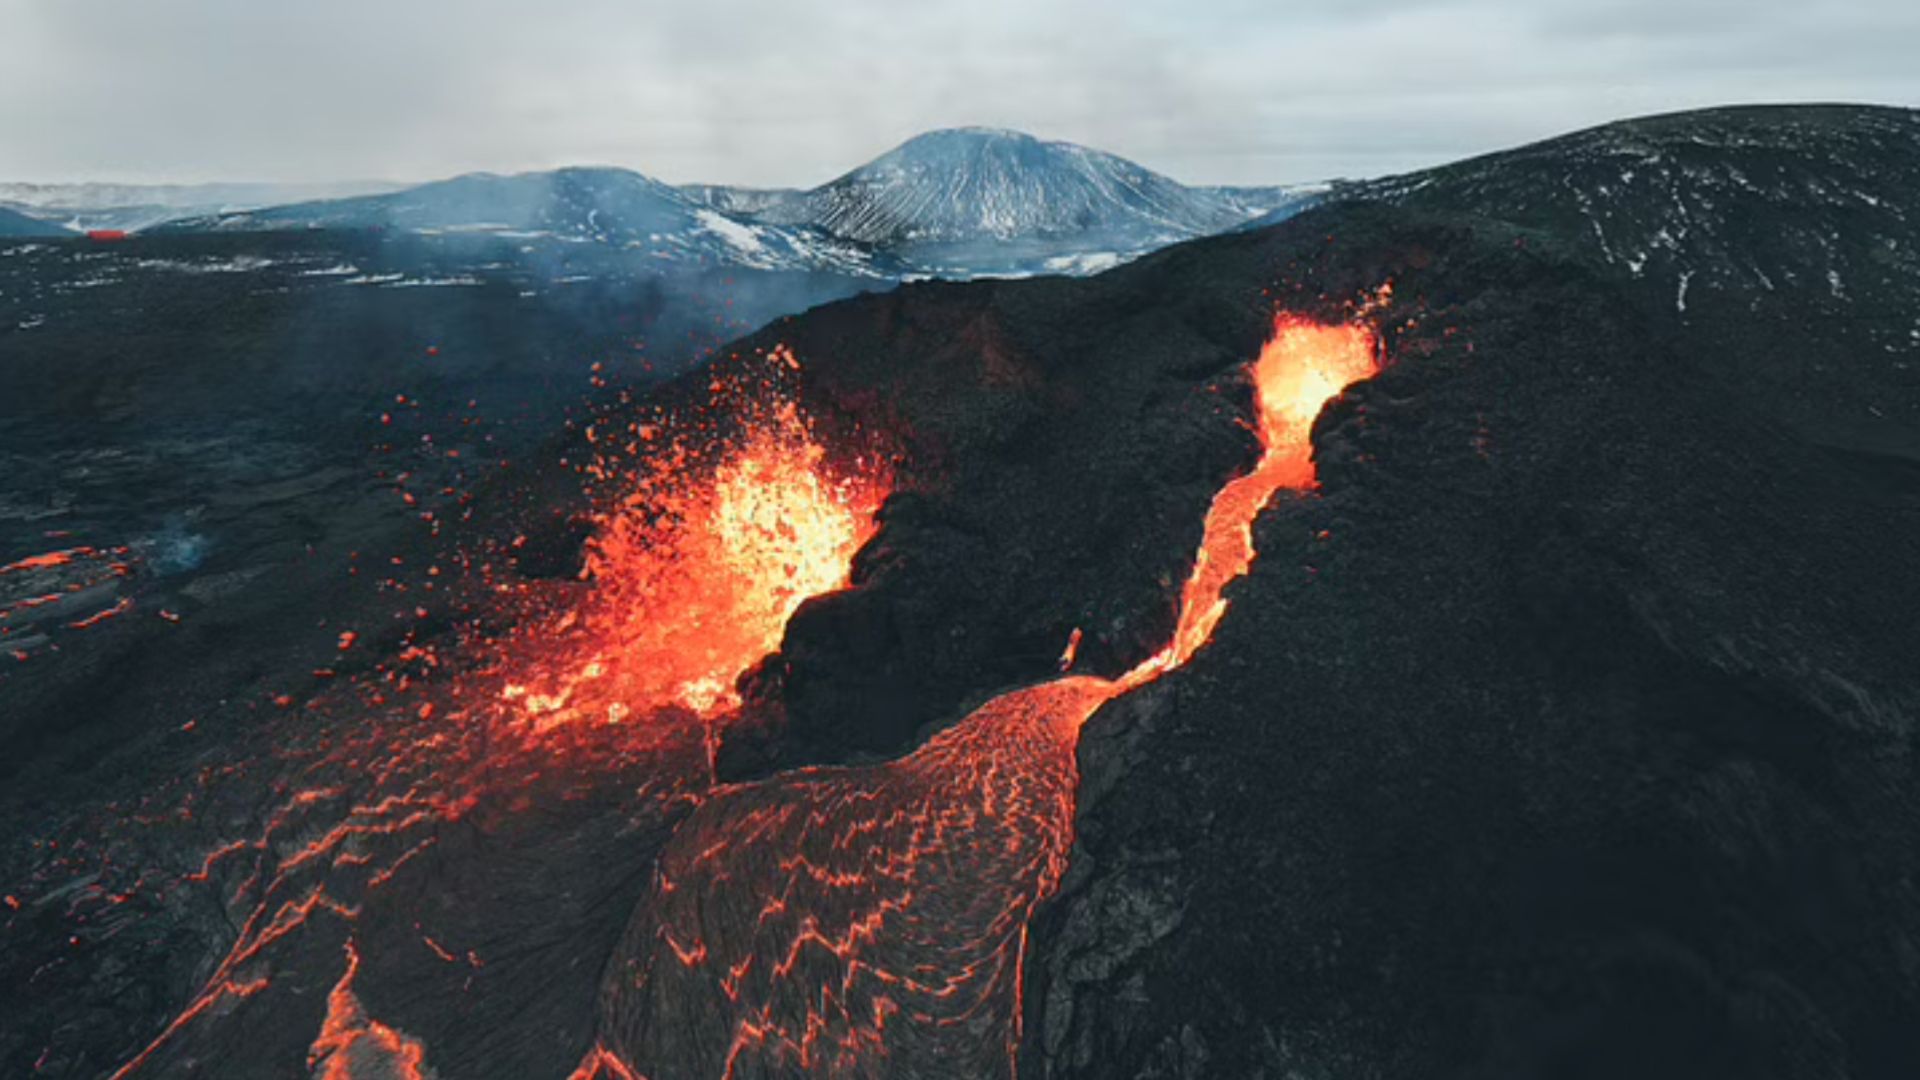 Volcanic eruption with lava flowing in Iceland